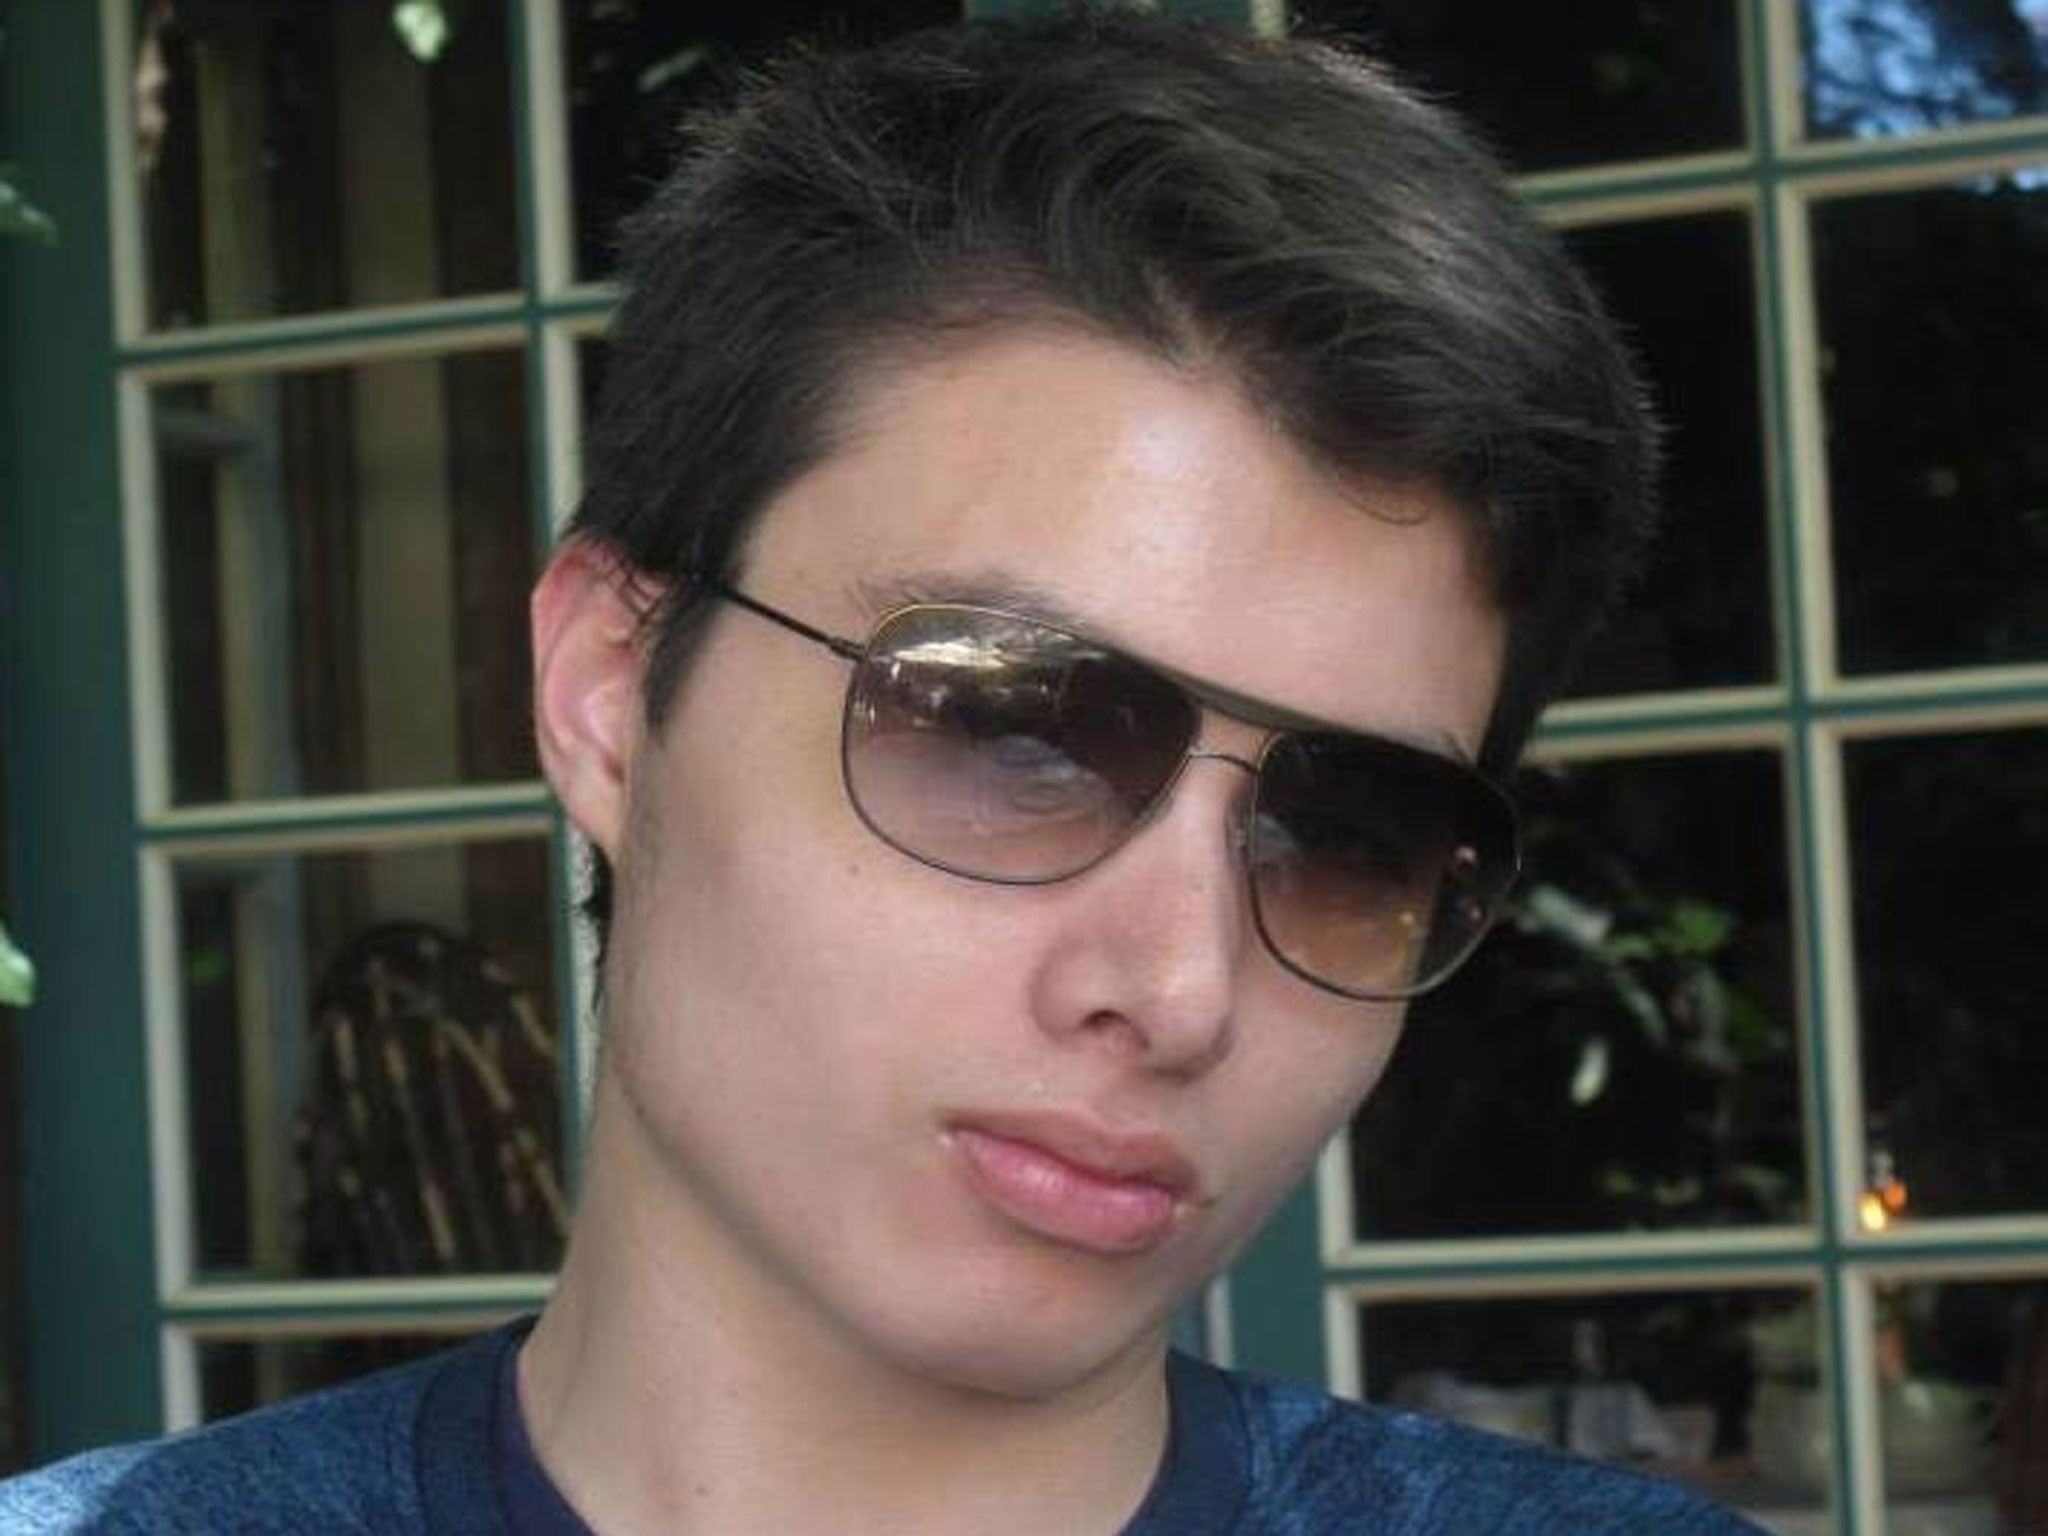 Elliot Rodger, who carried out the 2014 Isla Vista massacre, was supposedly part of the incel movement